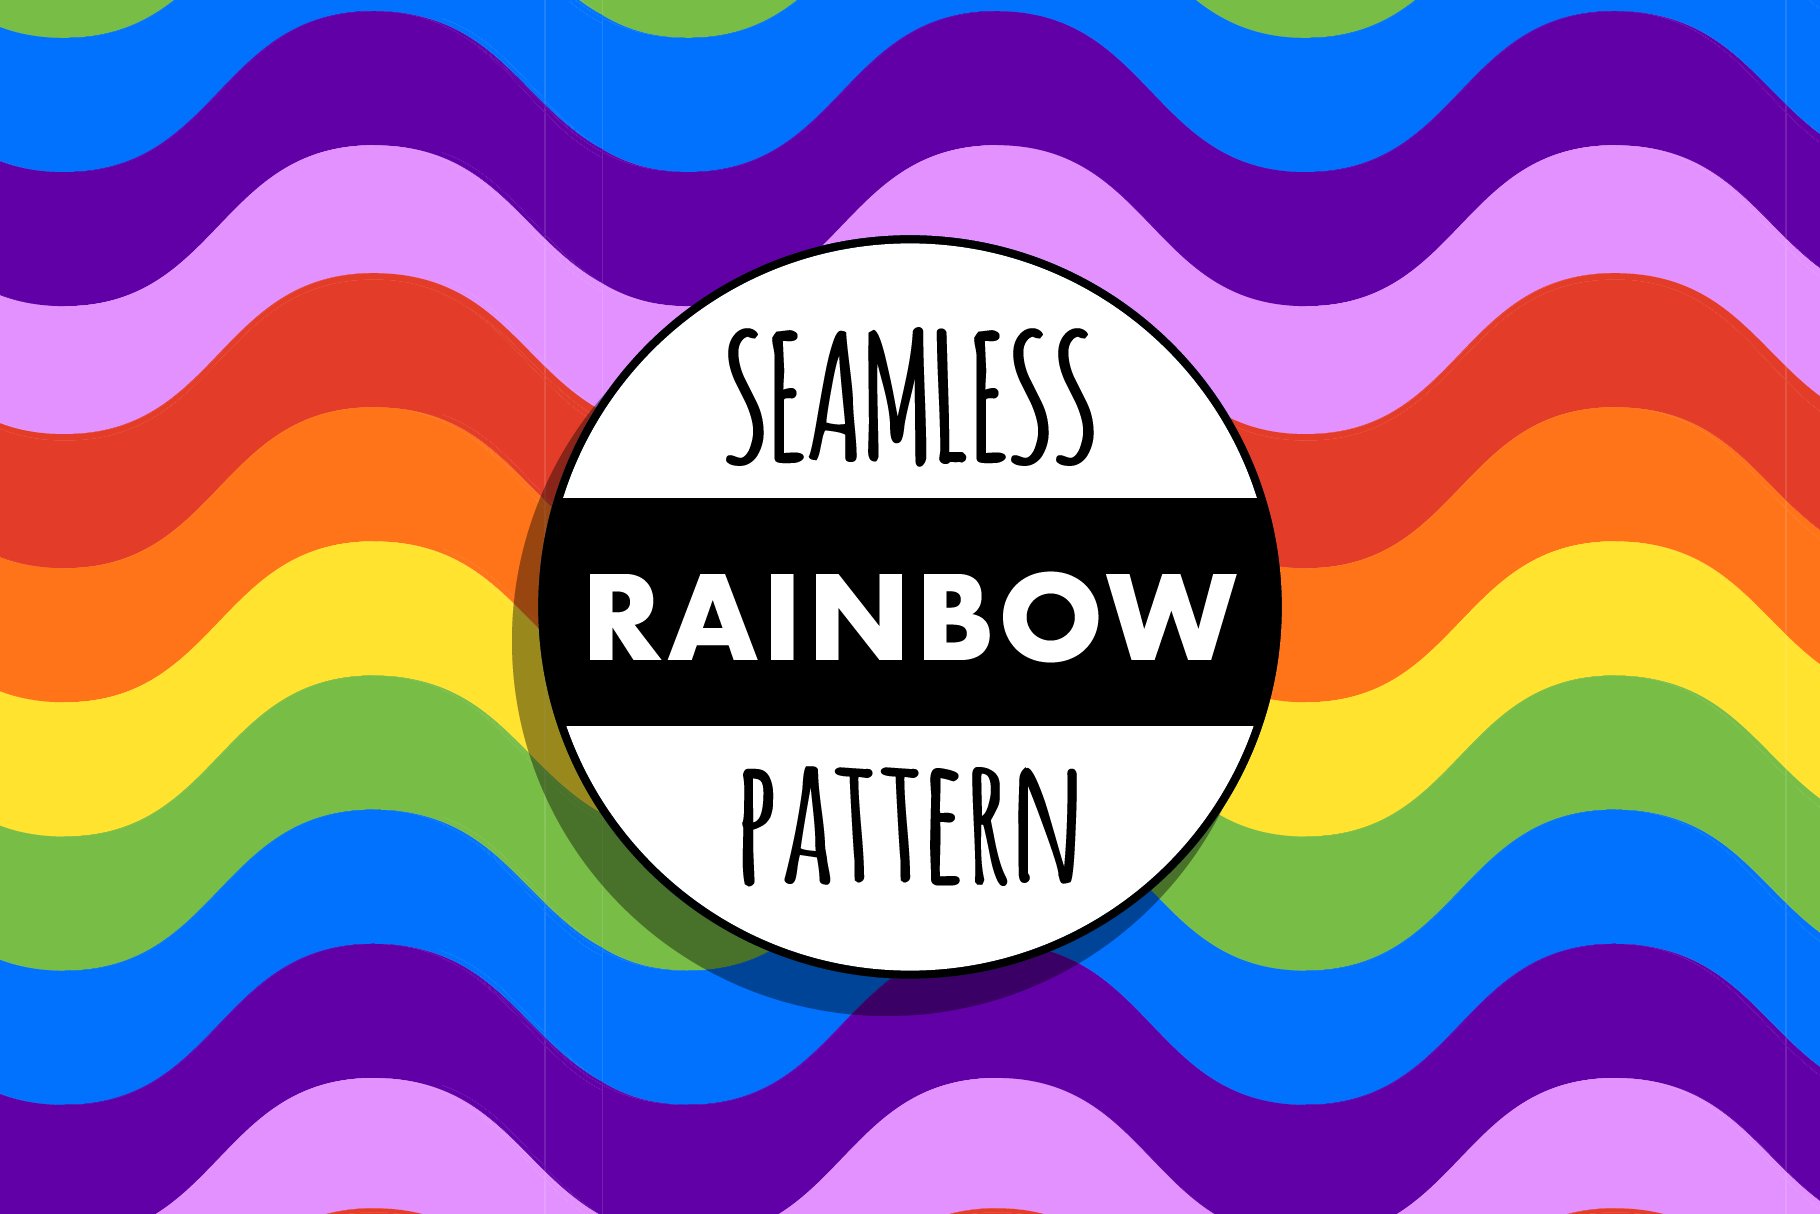 Seamless Rainbow Wave Pattern cover image.